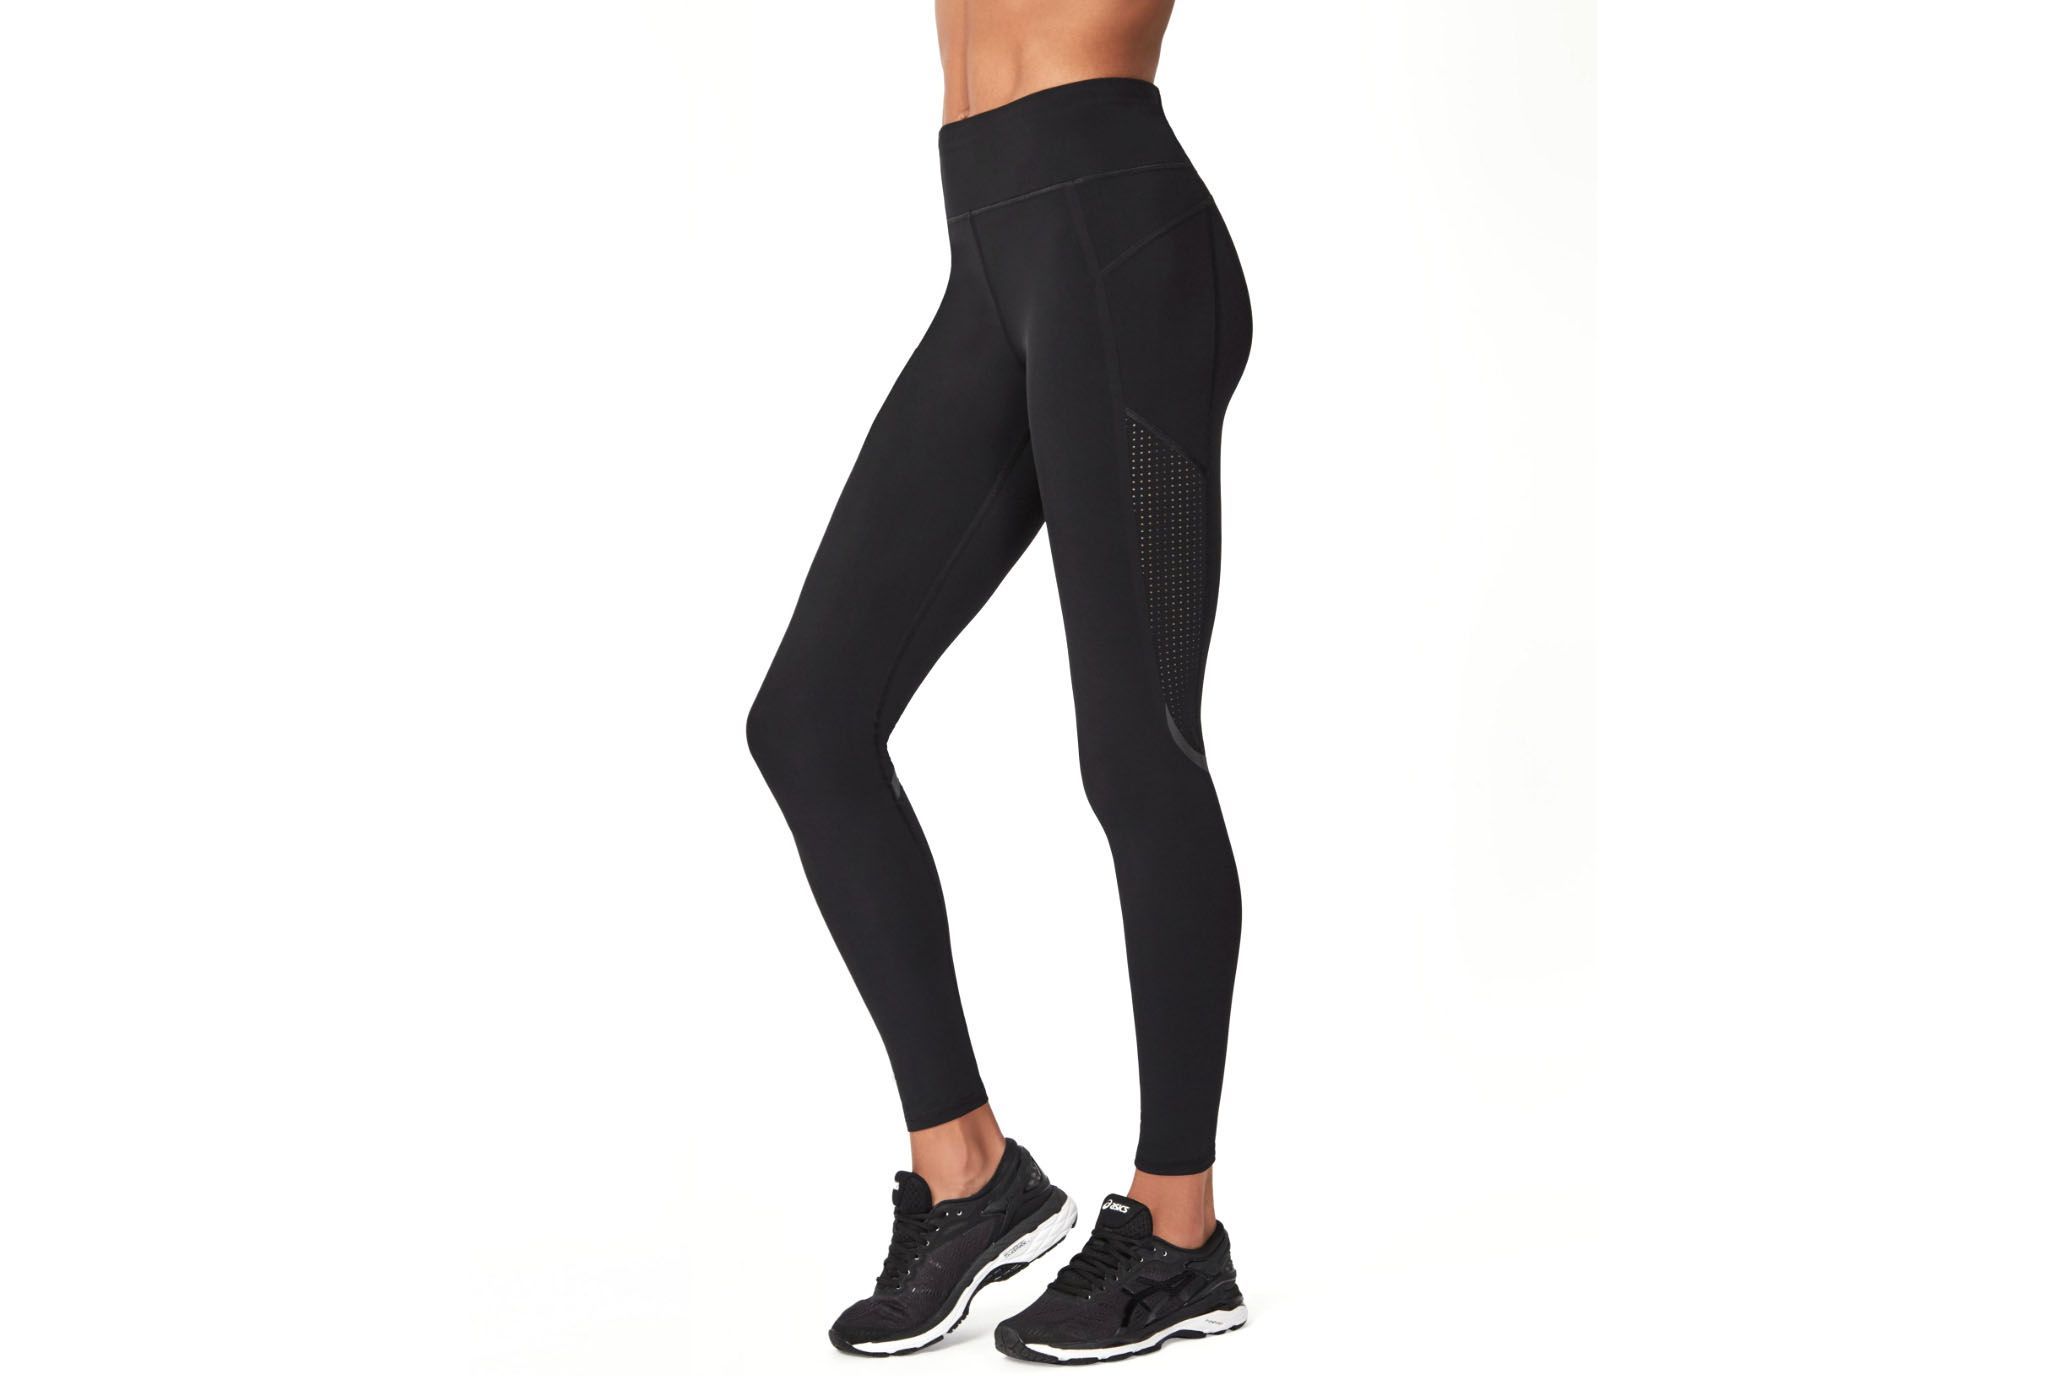 Best Compression Leggings 2019 | Compression Tights for Runners